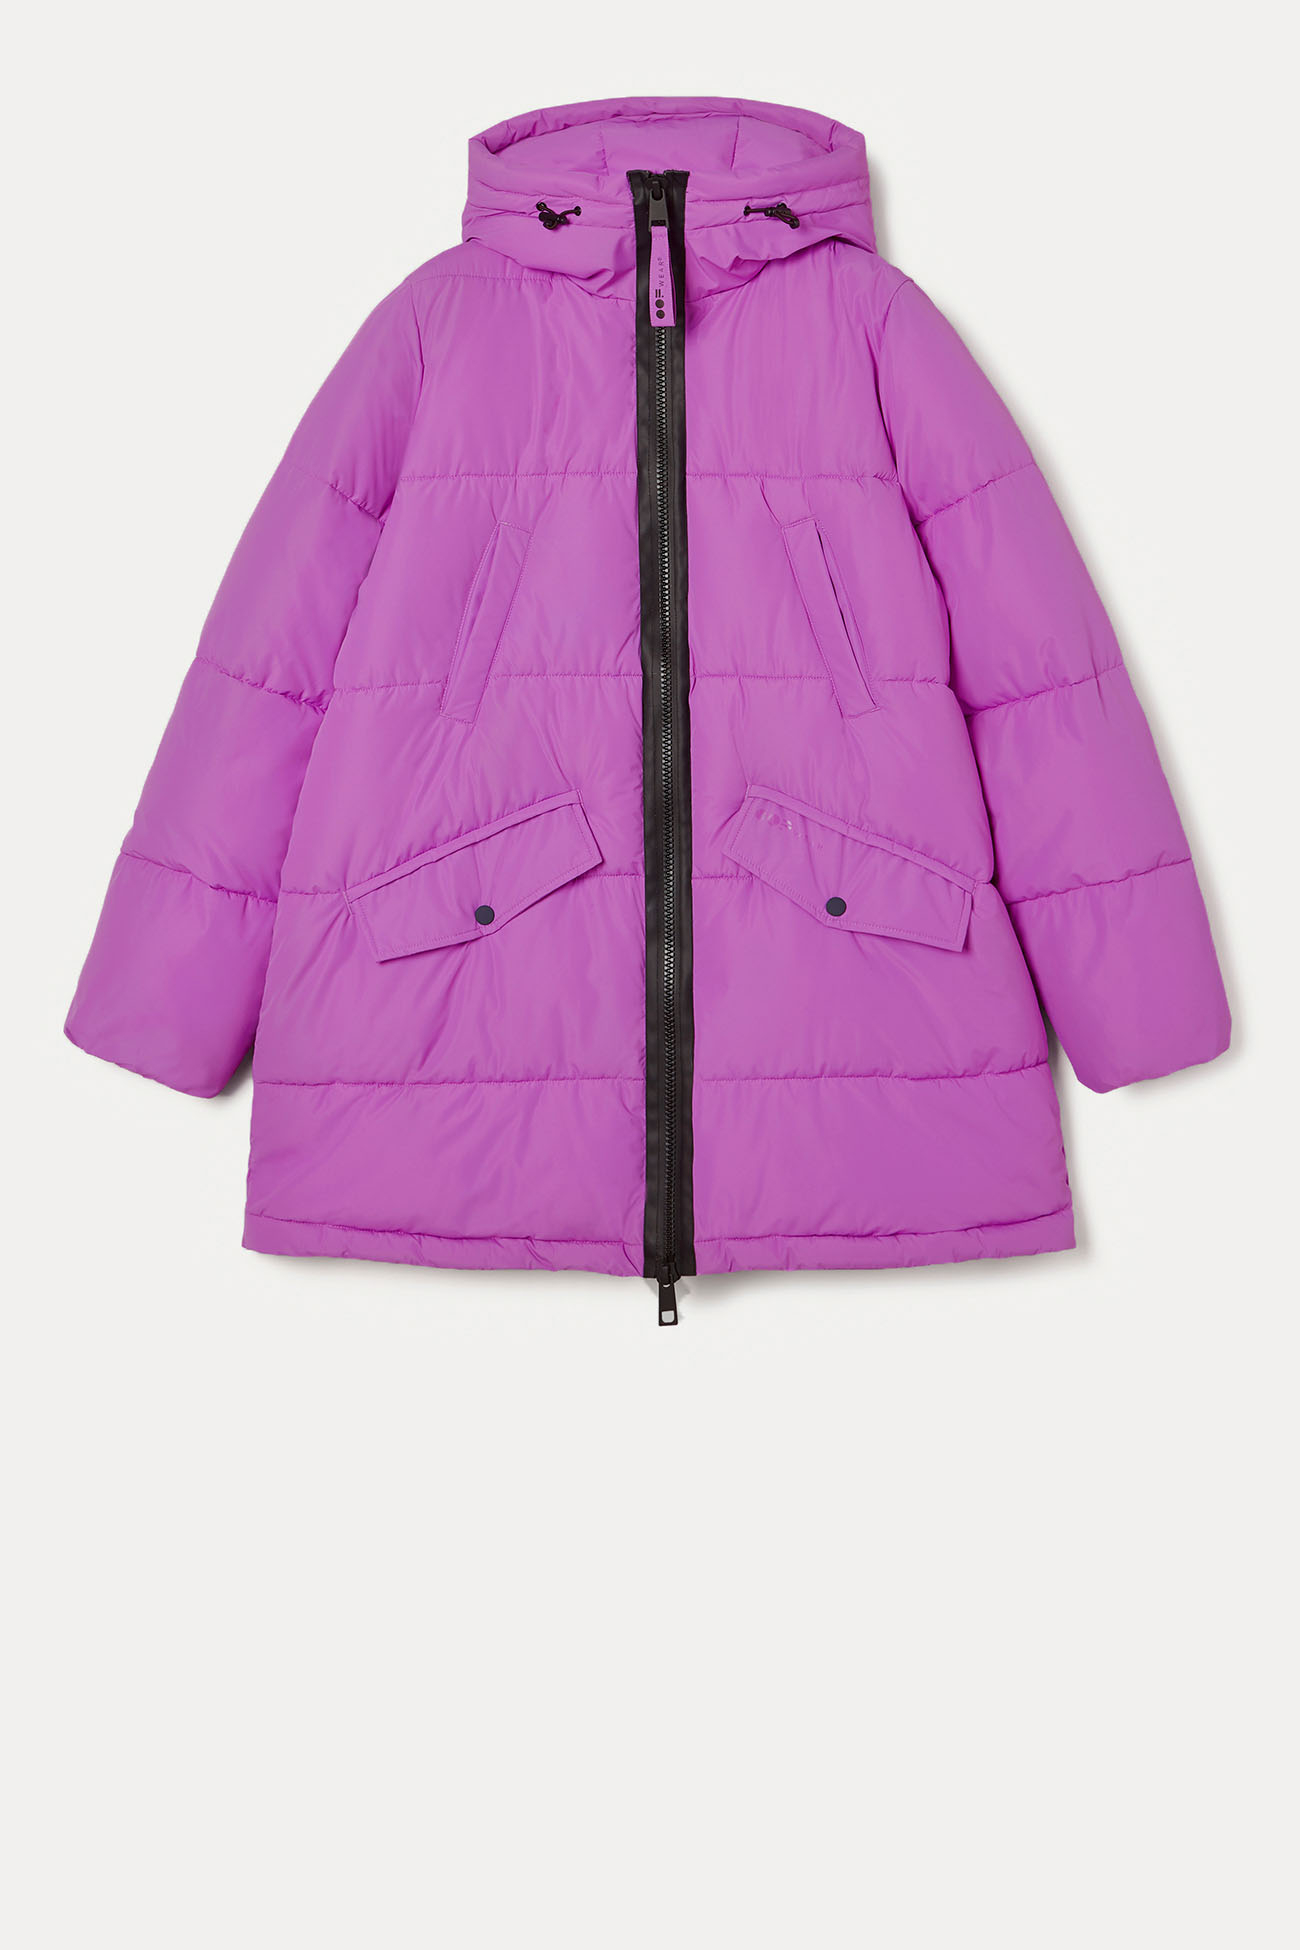 JACKET 9098 MADE IN WATER RESISTANT NYLON - ORCHID - OOF WEAR